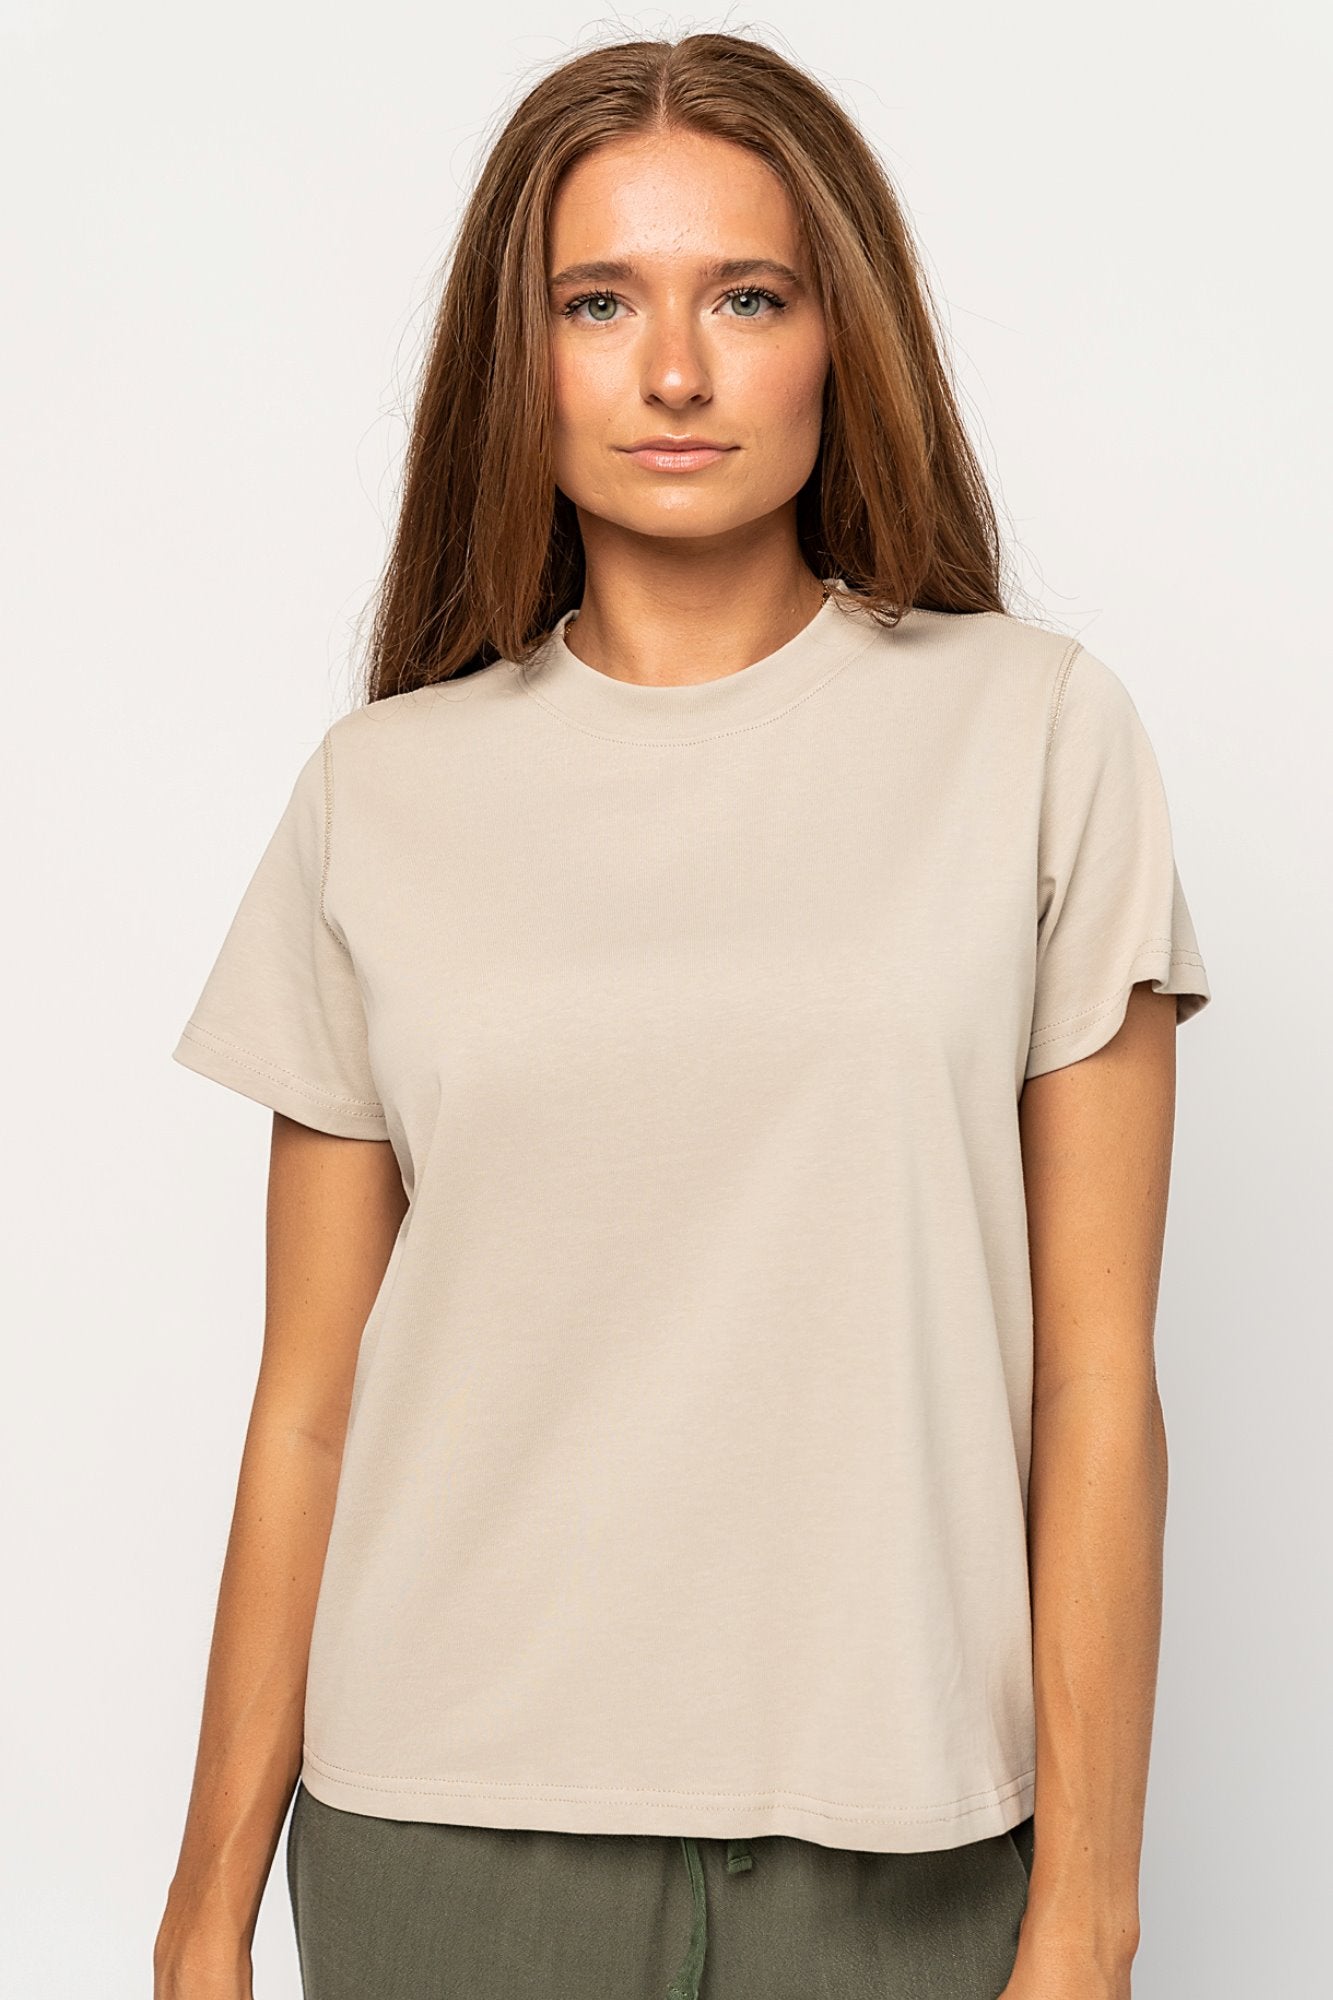 Grady Top in Stone (Small-XL) Holley Girl 